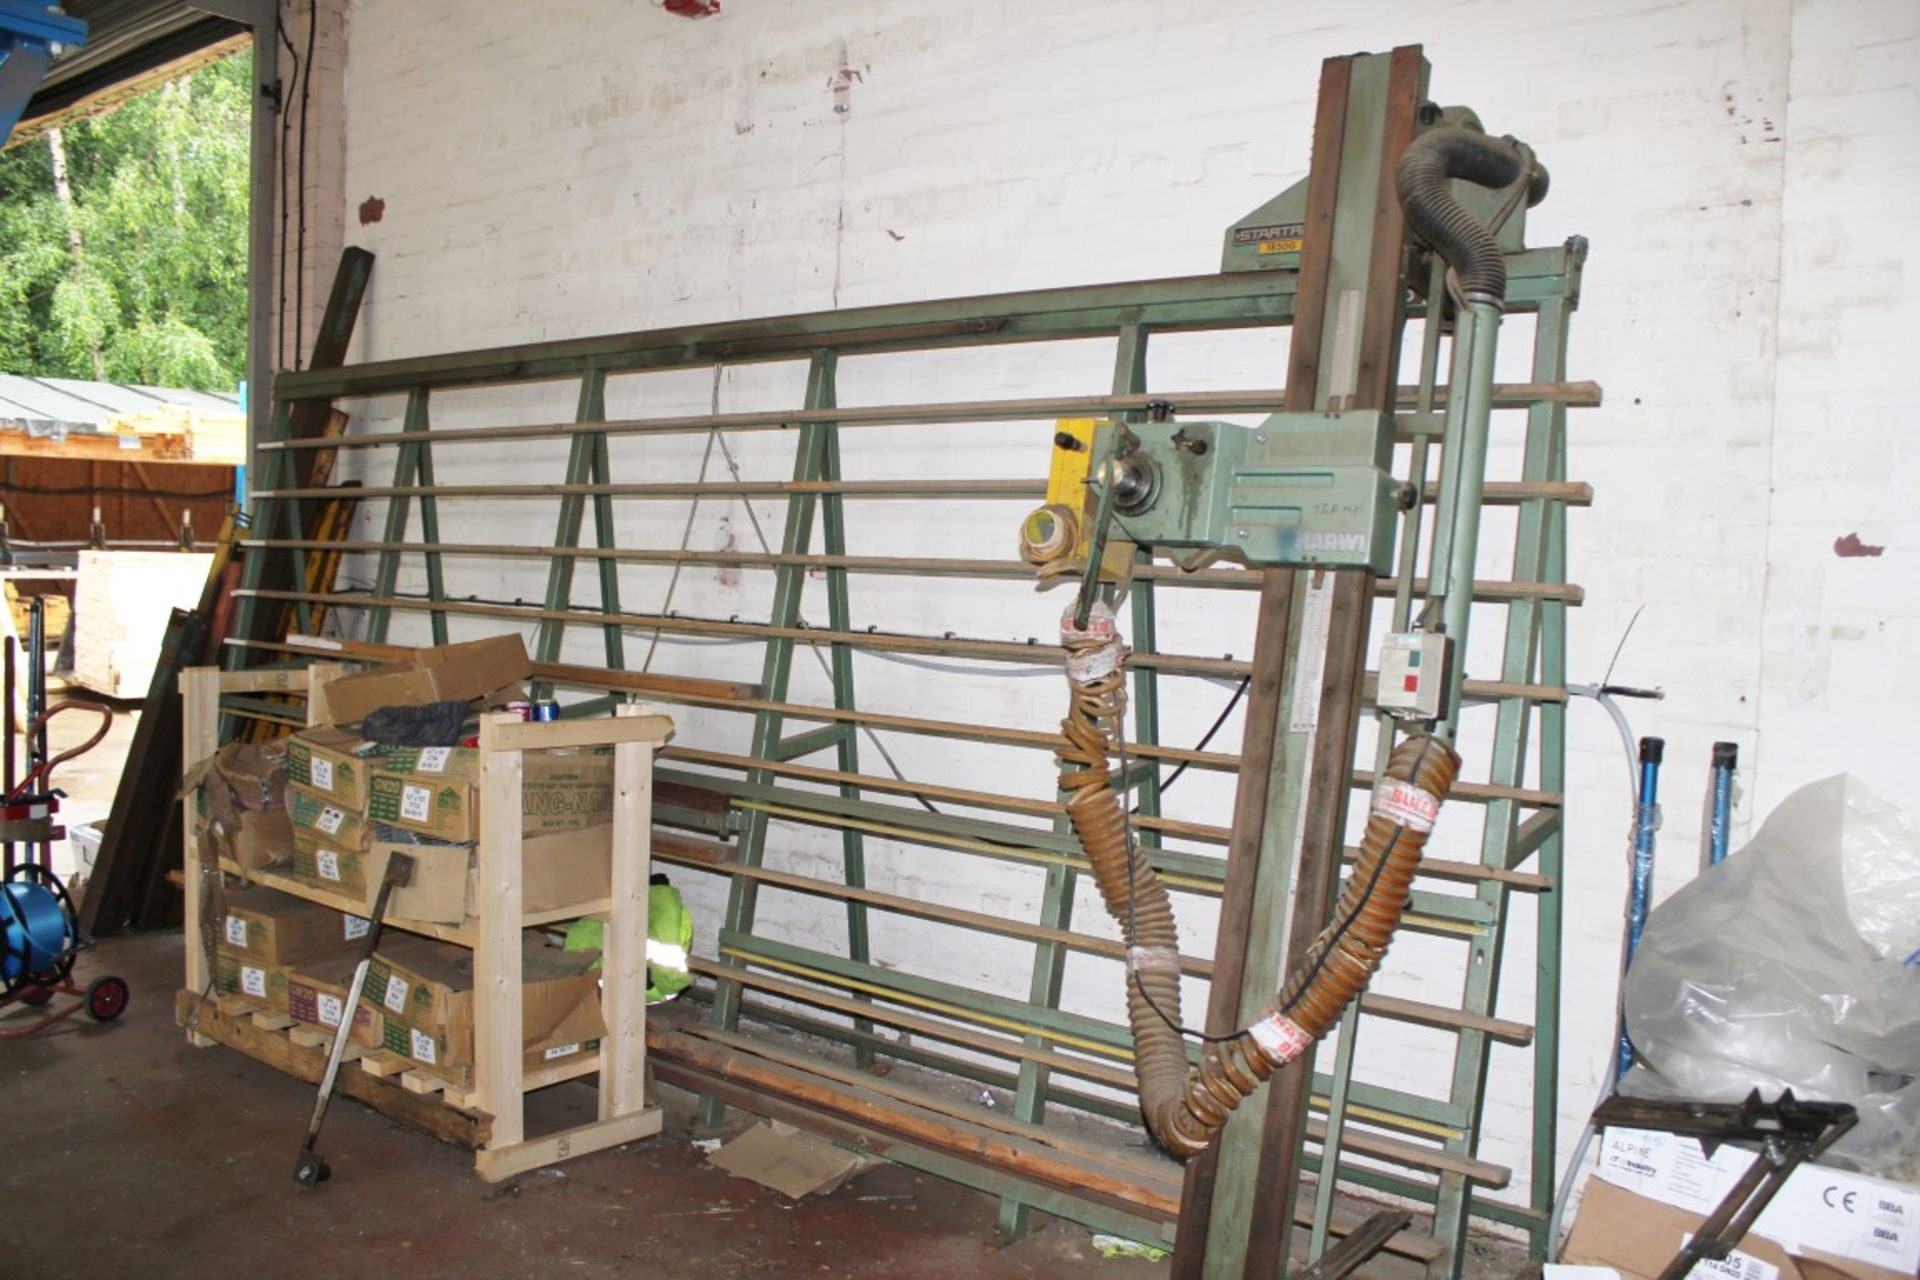 1 x Startrite Harwi 1850G Wood Cutting Vertical Wall Saw - 3 Phase - Working Order - Approx Length